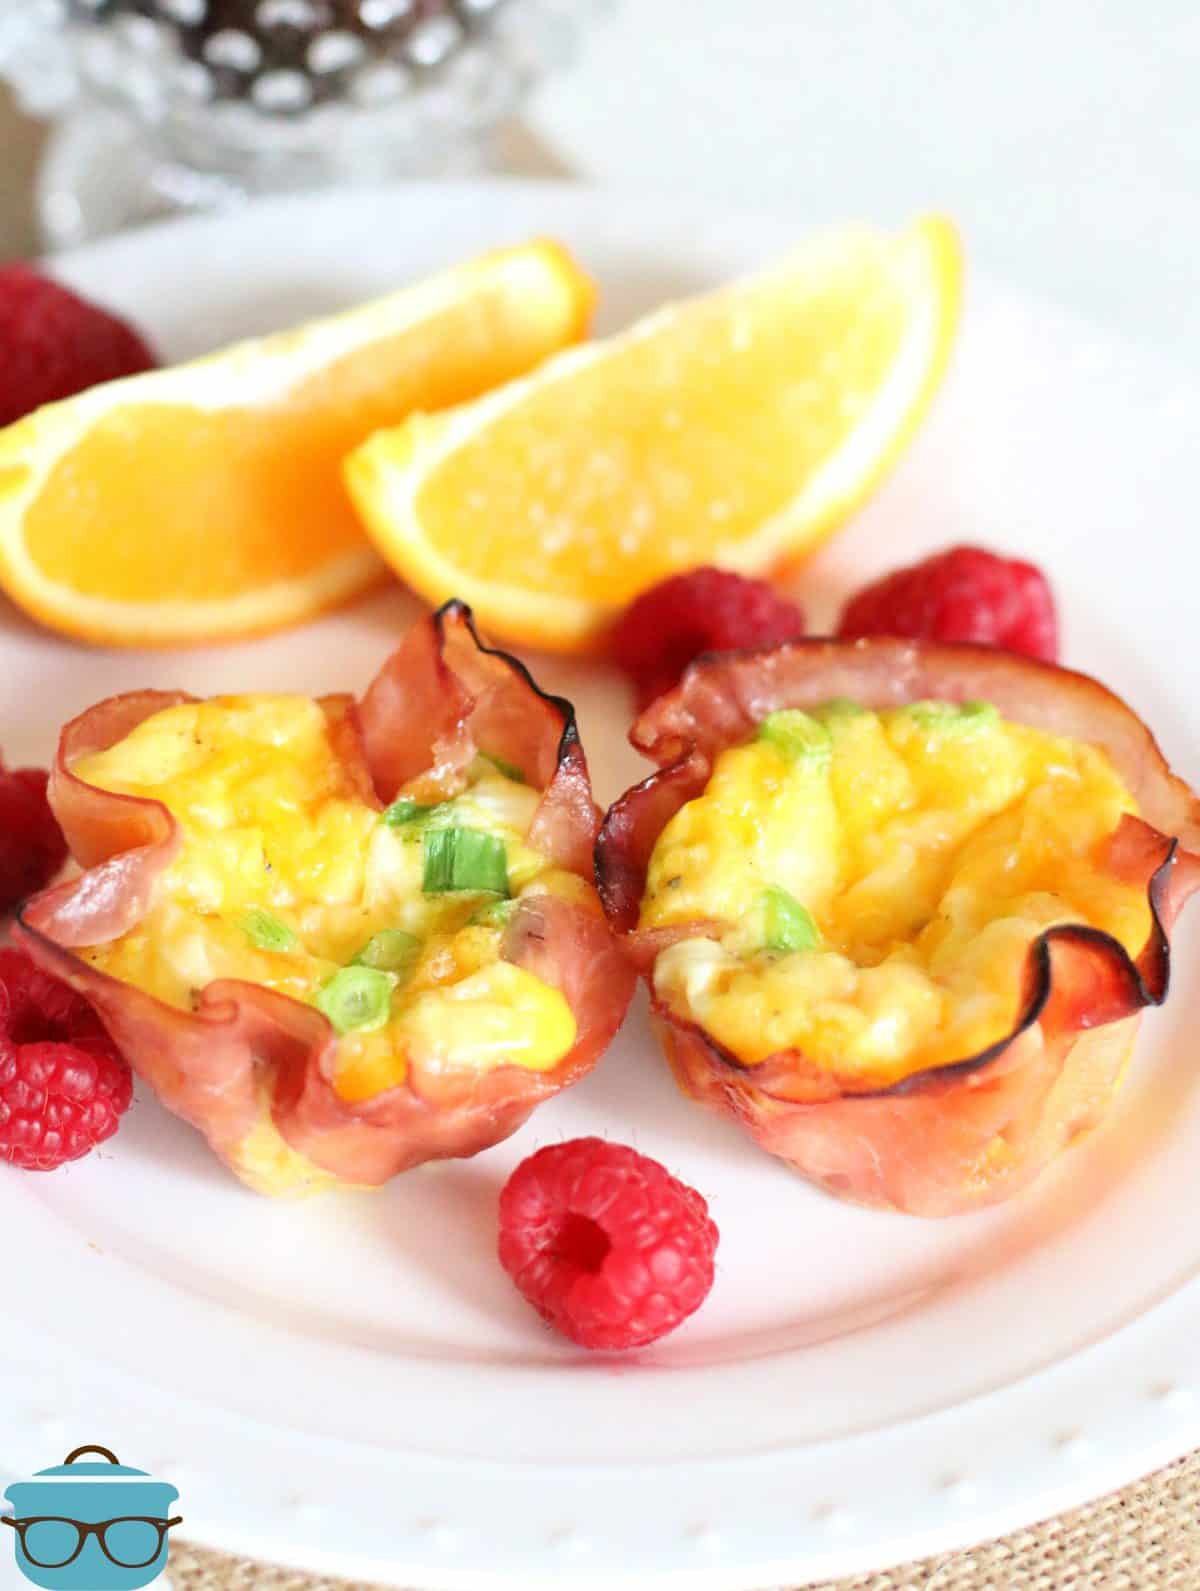 two ham and egg cups shown on a white plate with fresh raspberries and sliced oranges. 